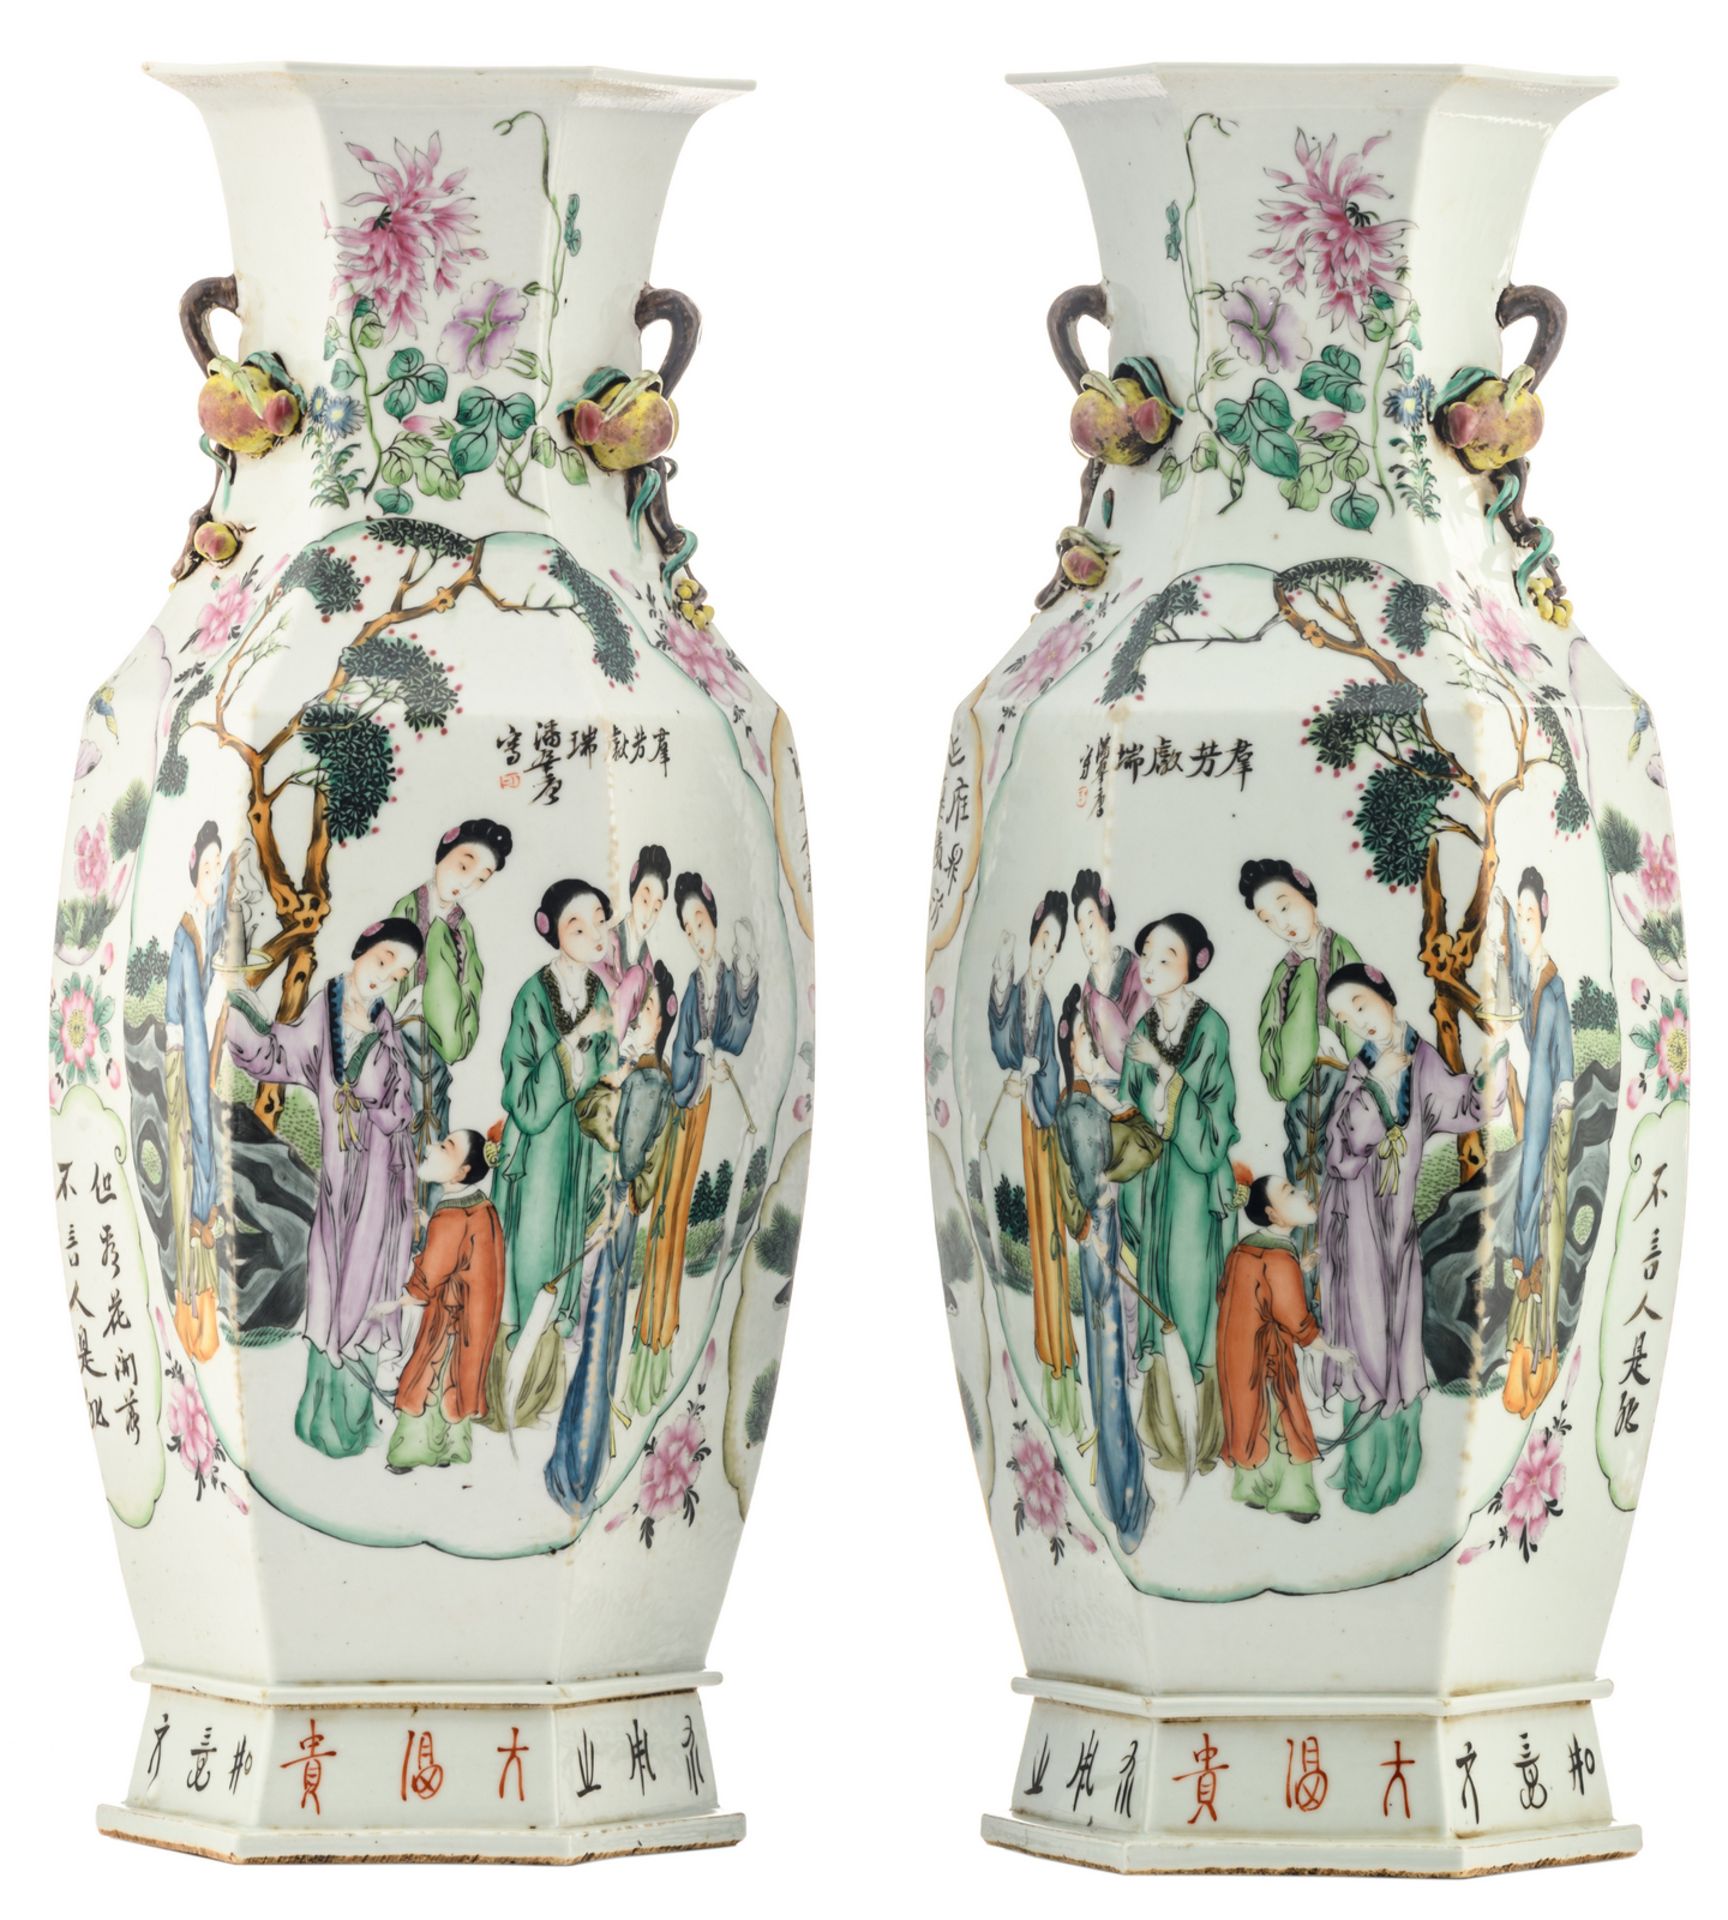 A pair of Chinese famille rose quadrangular vases, decorated with a gallant scene and calligraphic